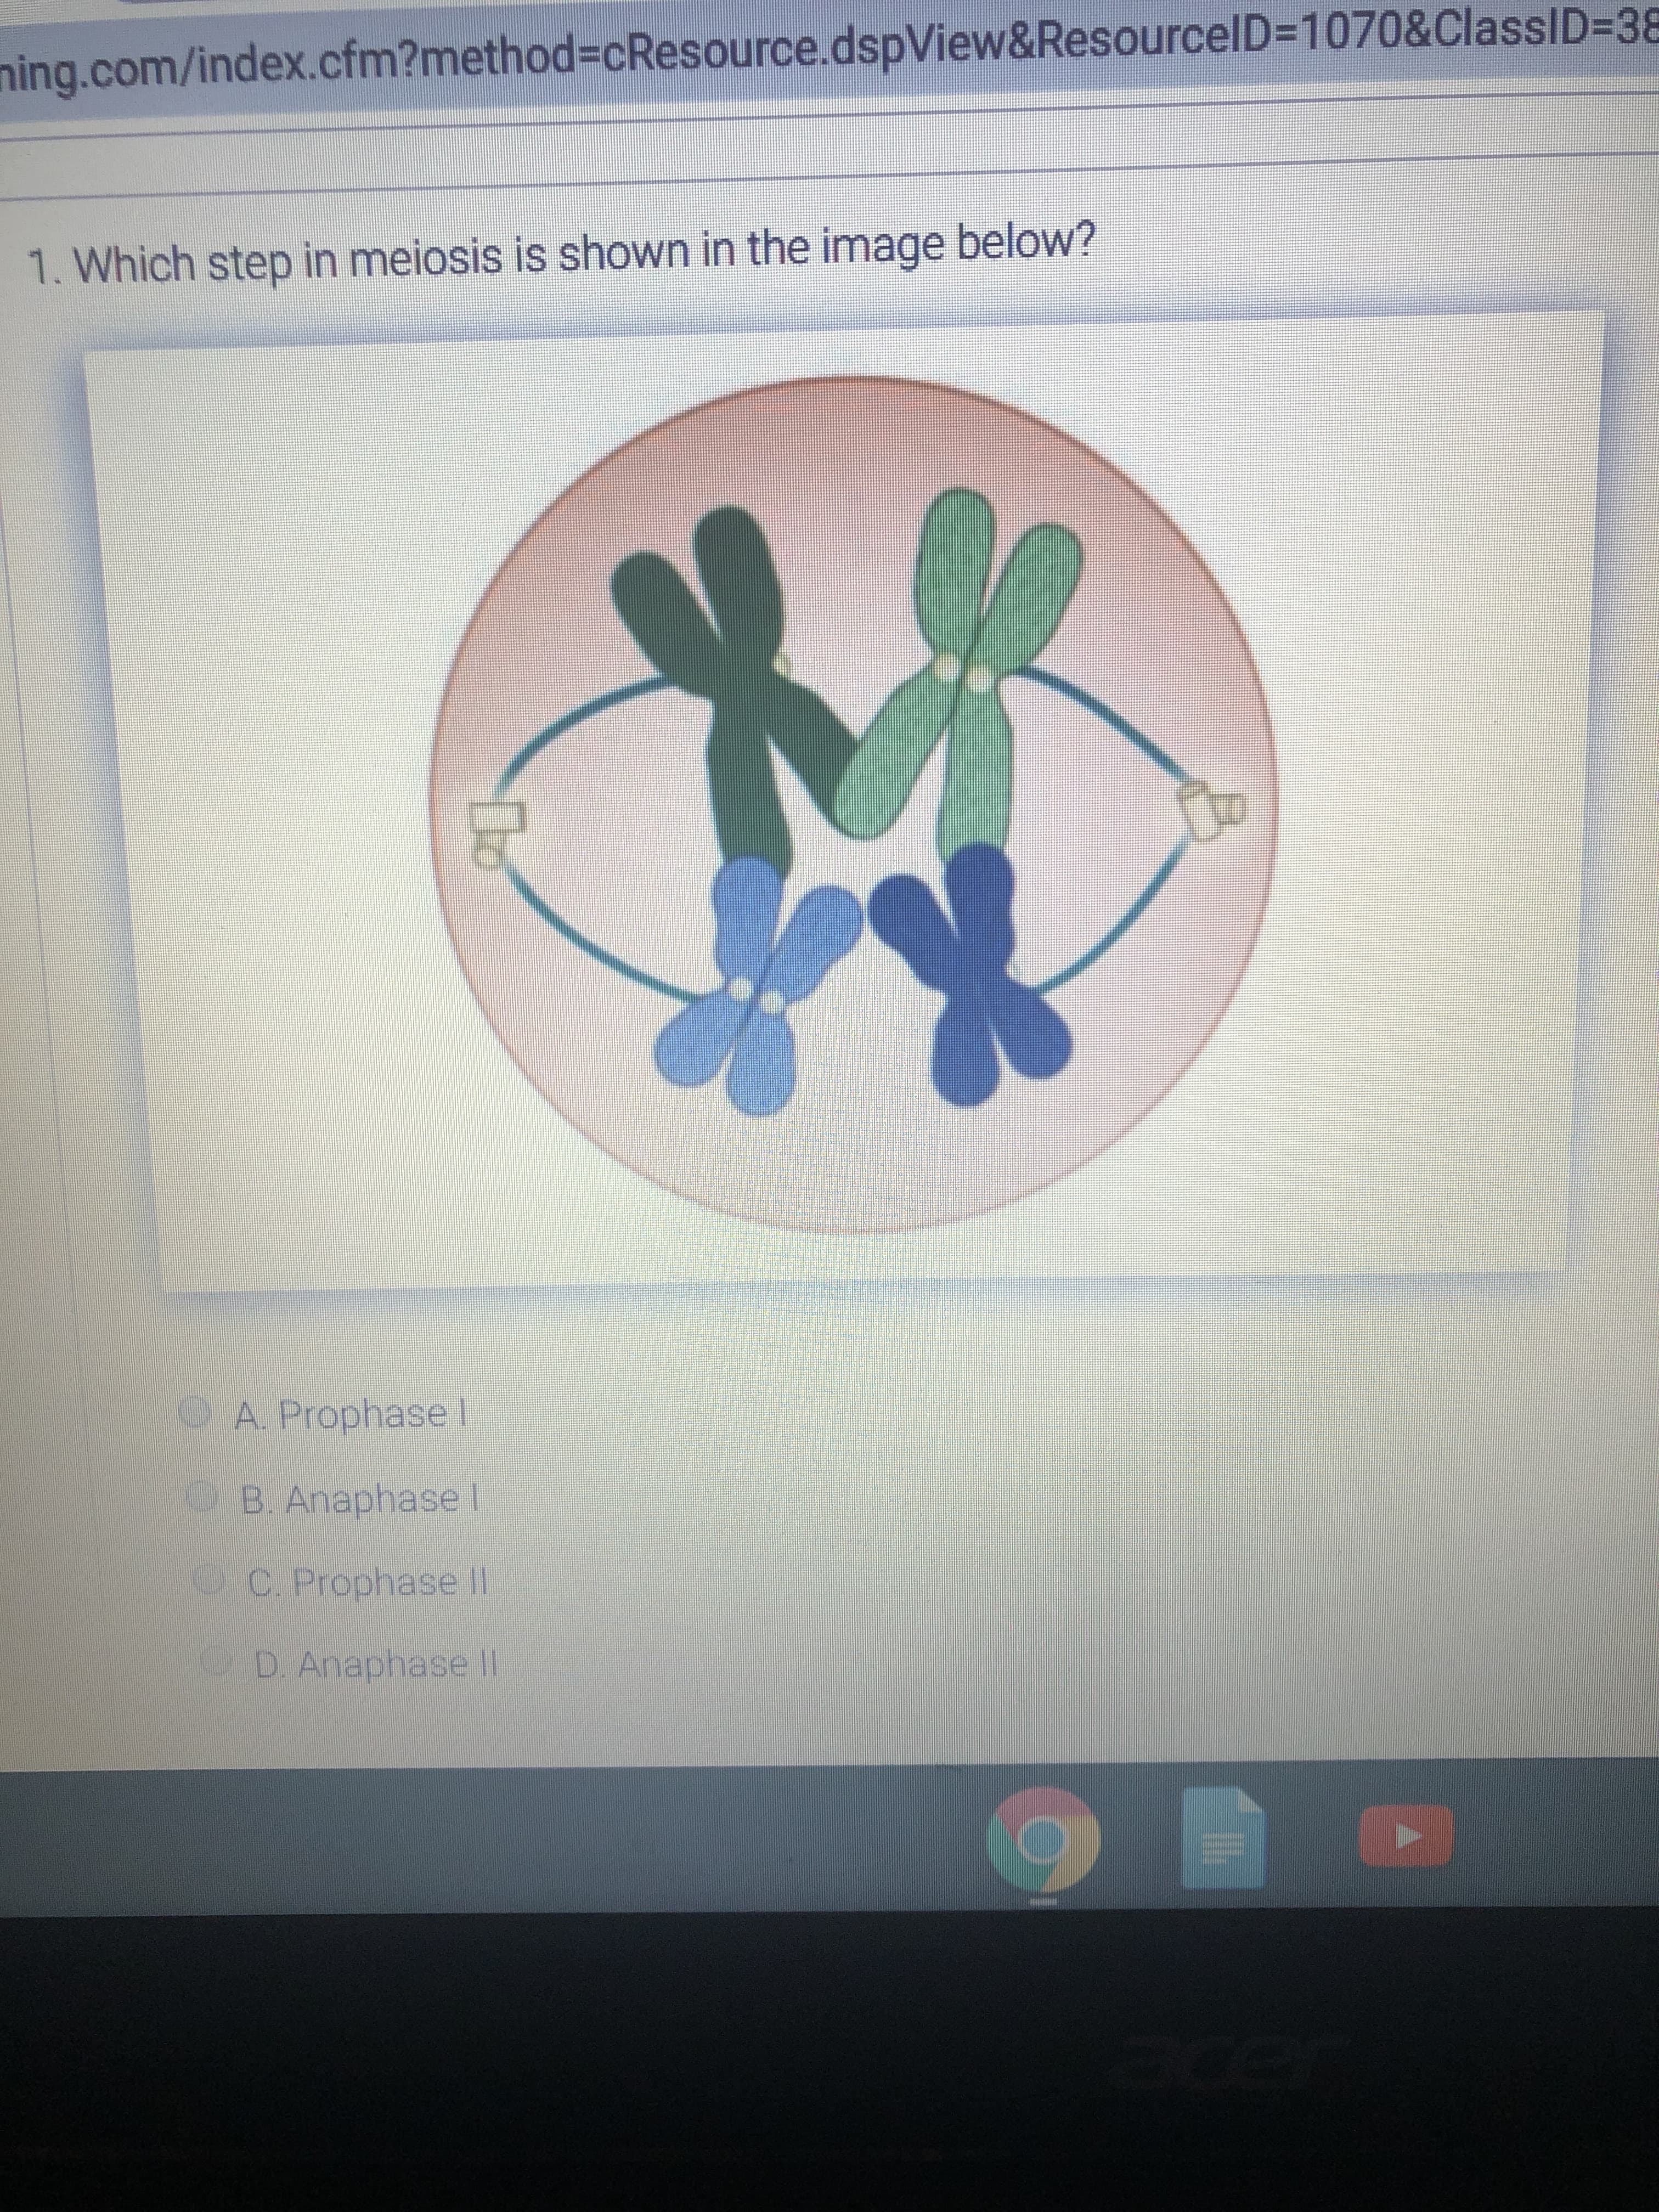 ning.com/index.cfm?method%3DcResource.dspView&ResourcelD=D1070&ClassID=D38
1. Which step in meiosis is shown in the image below?
A. Prophase l
OB. Anaphase I
C. Prophase II
OD AnaphaselI
